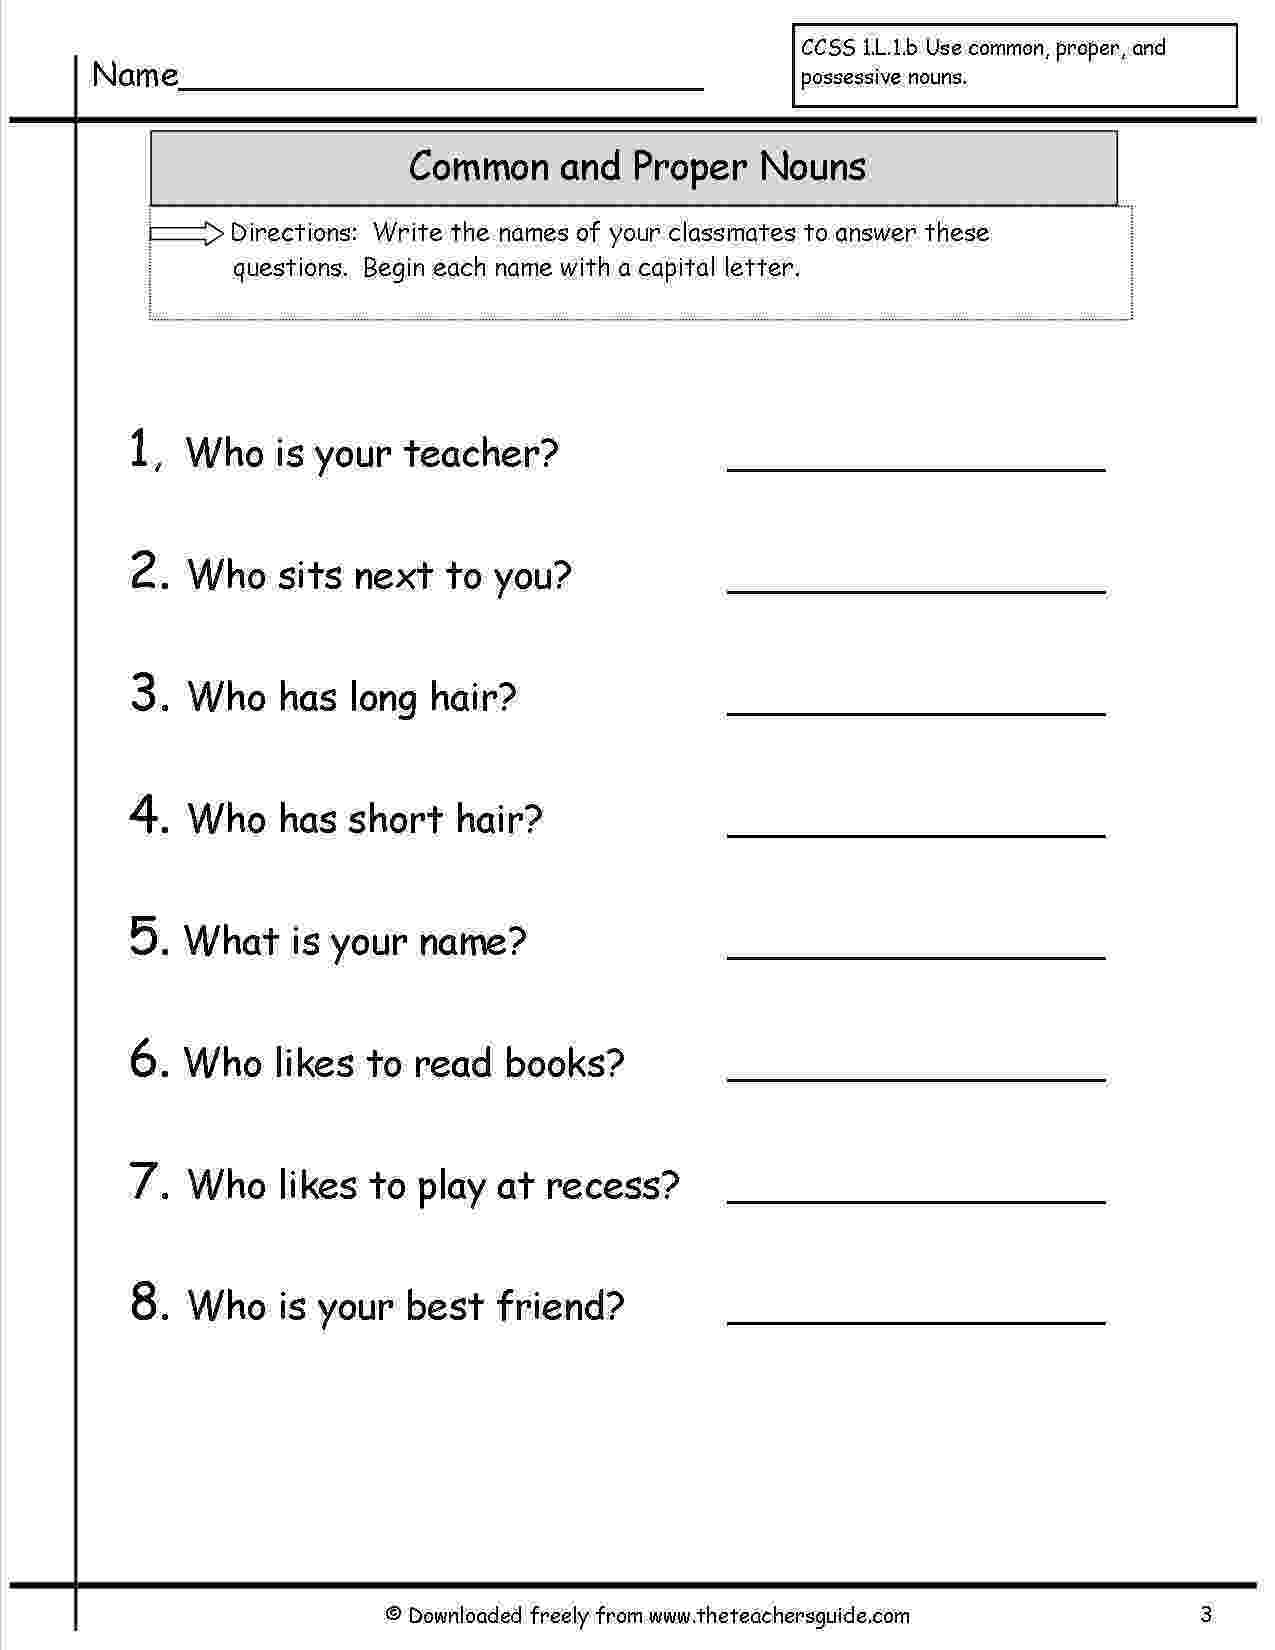 noun worksheets for grade 1 with answers common and proper nouns worksheet answer key by robert for worksheets noun with grade answers 1 